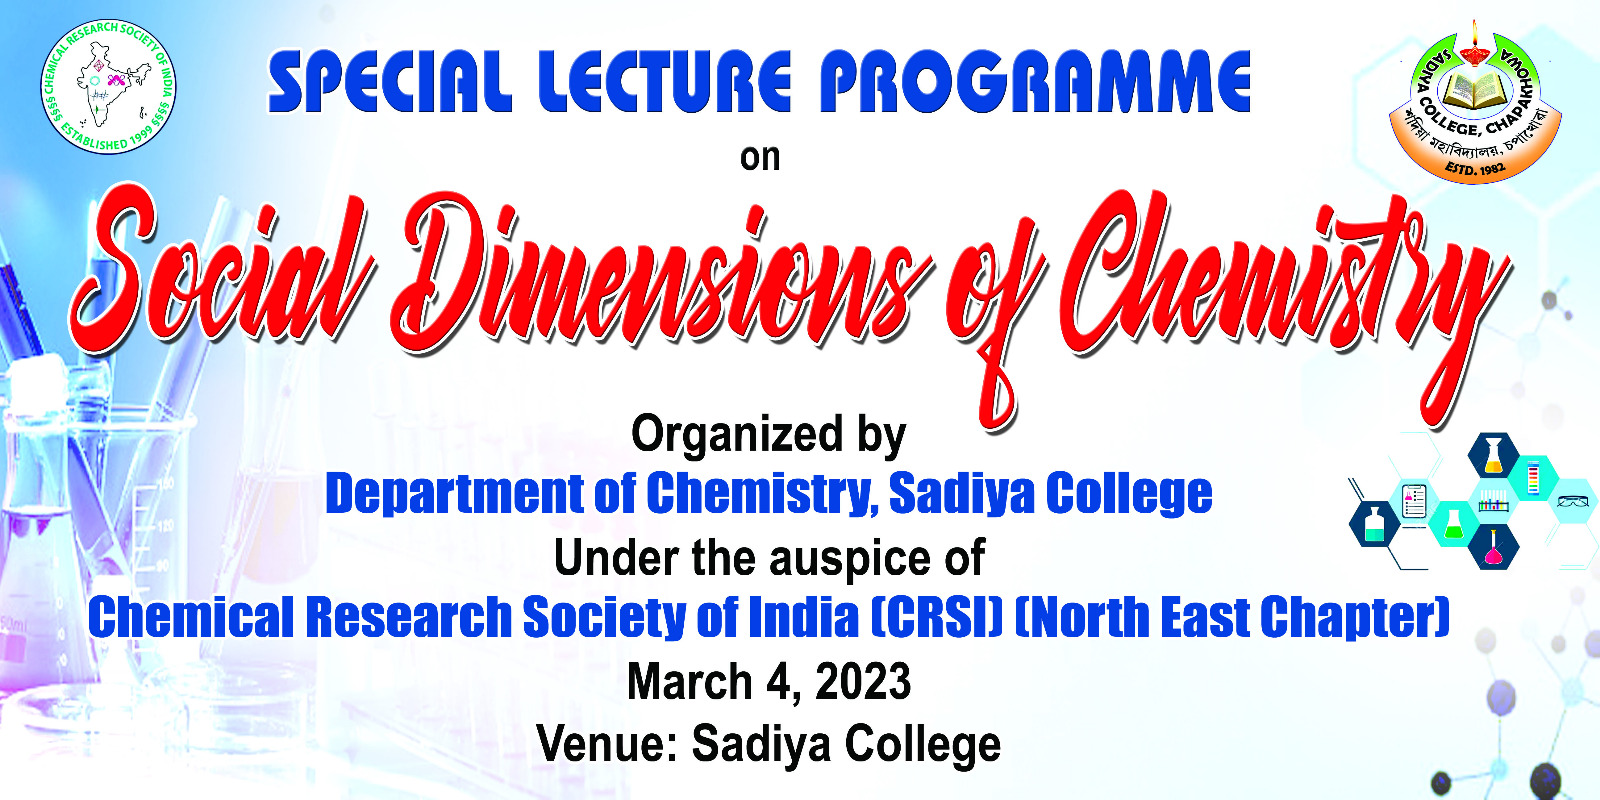 Department of Chemistry organizes Special Lecture Program on Social Dimension of Chemistry